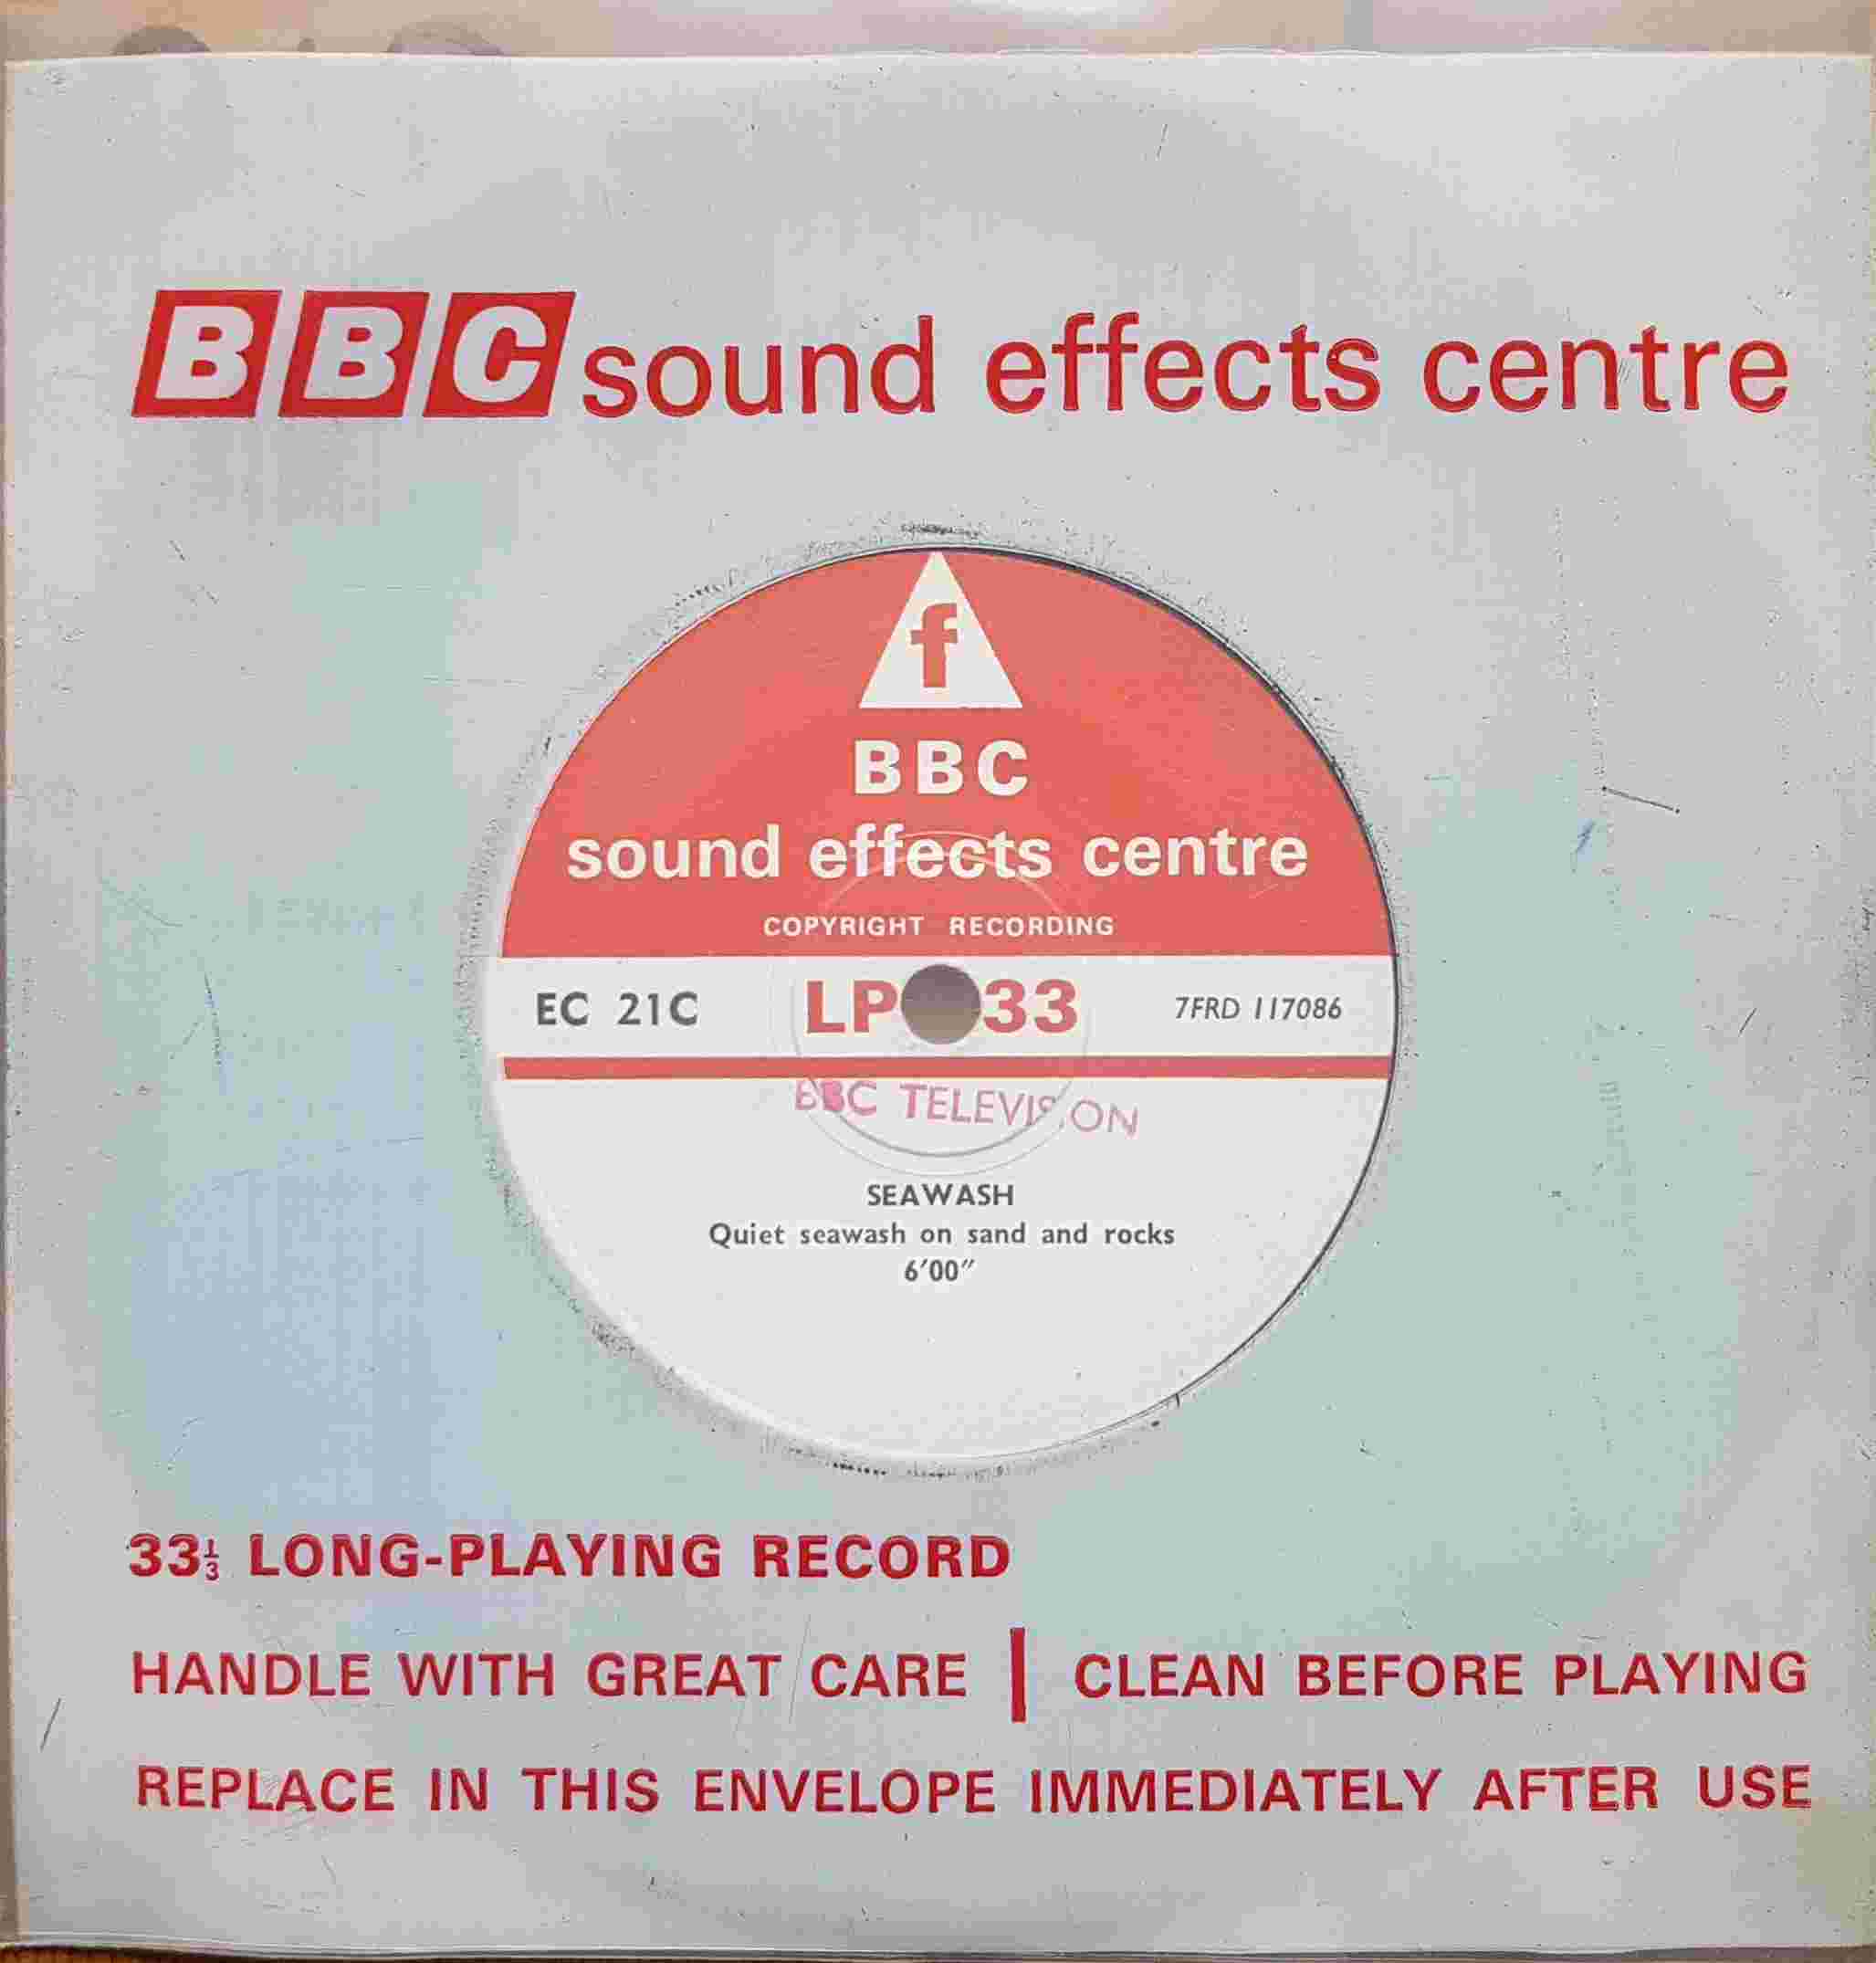 Picture of EC 21C Seawash by artist Not registered from the BBC records and Tapes library